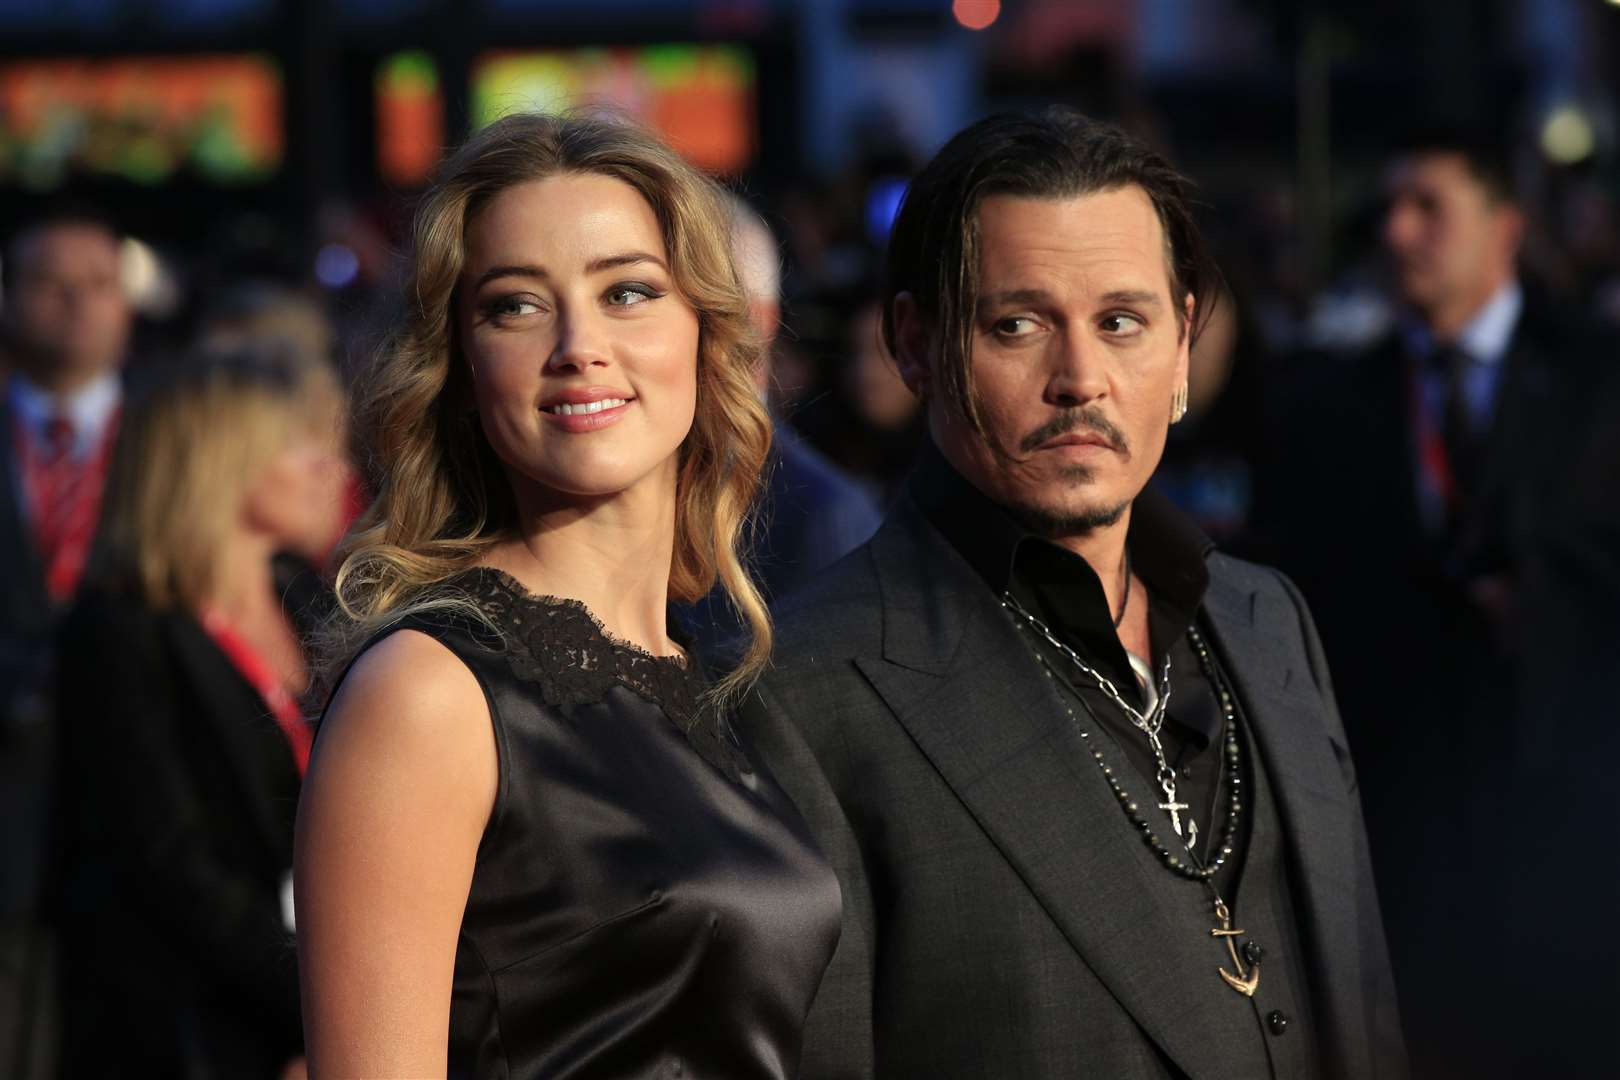 Amber Heard and Johnny Depp attending the premiere of Black Mass during the 59th BFI London Film Festival in 2015 (Jonathan Brady/PA)